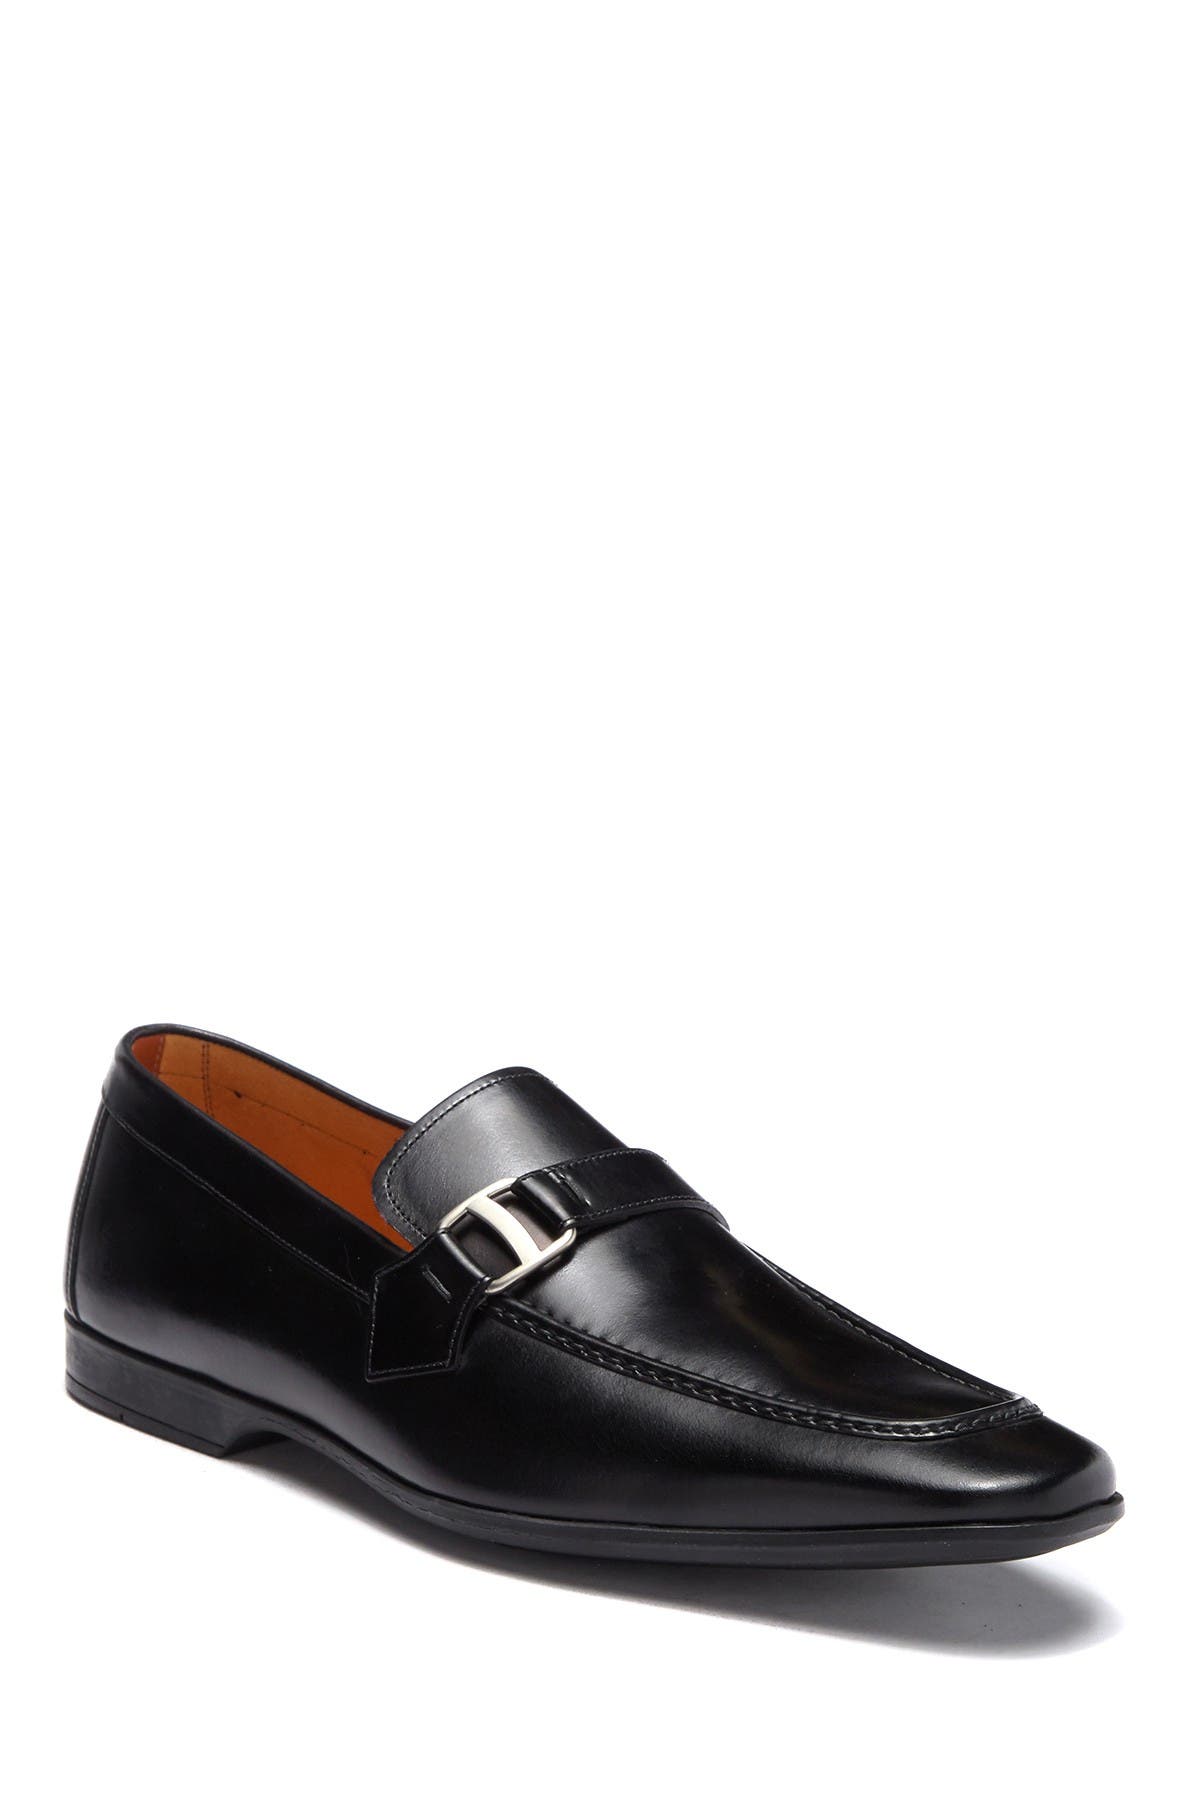 Magnanni | Tonic Leather Buckle Loafer 